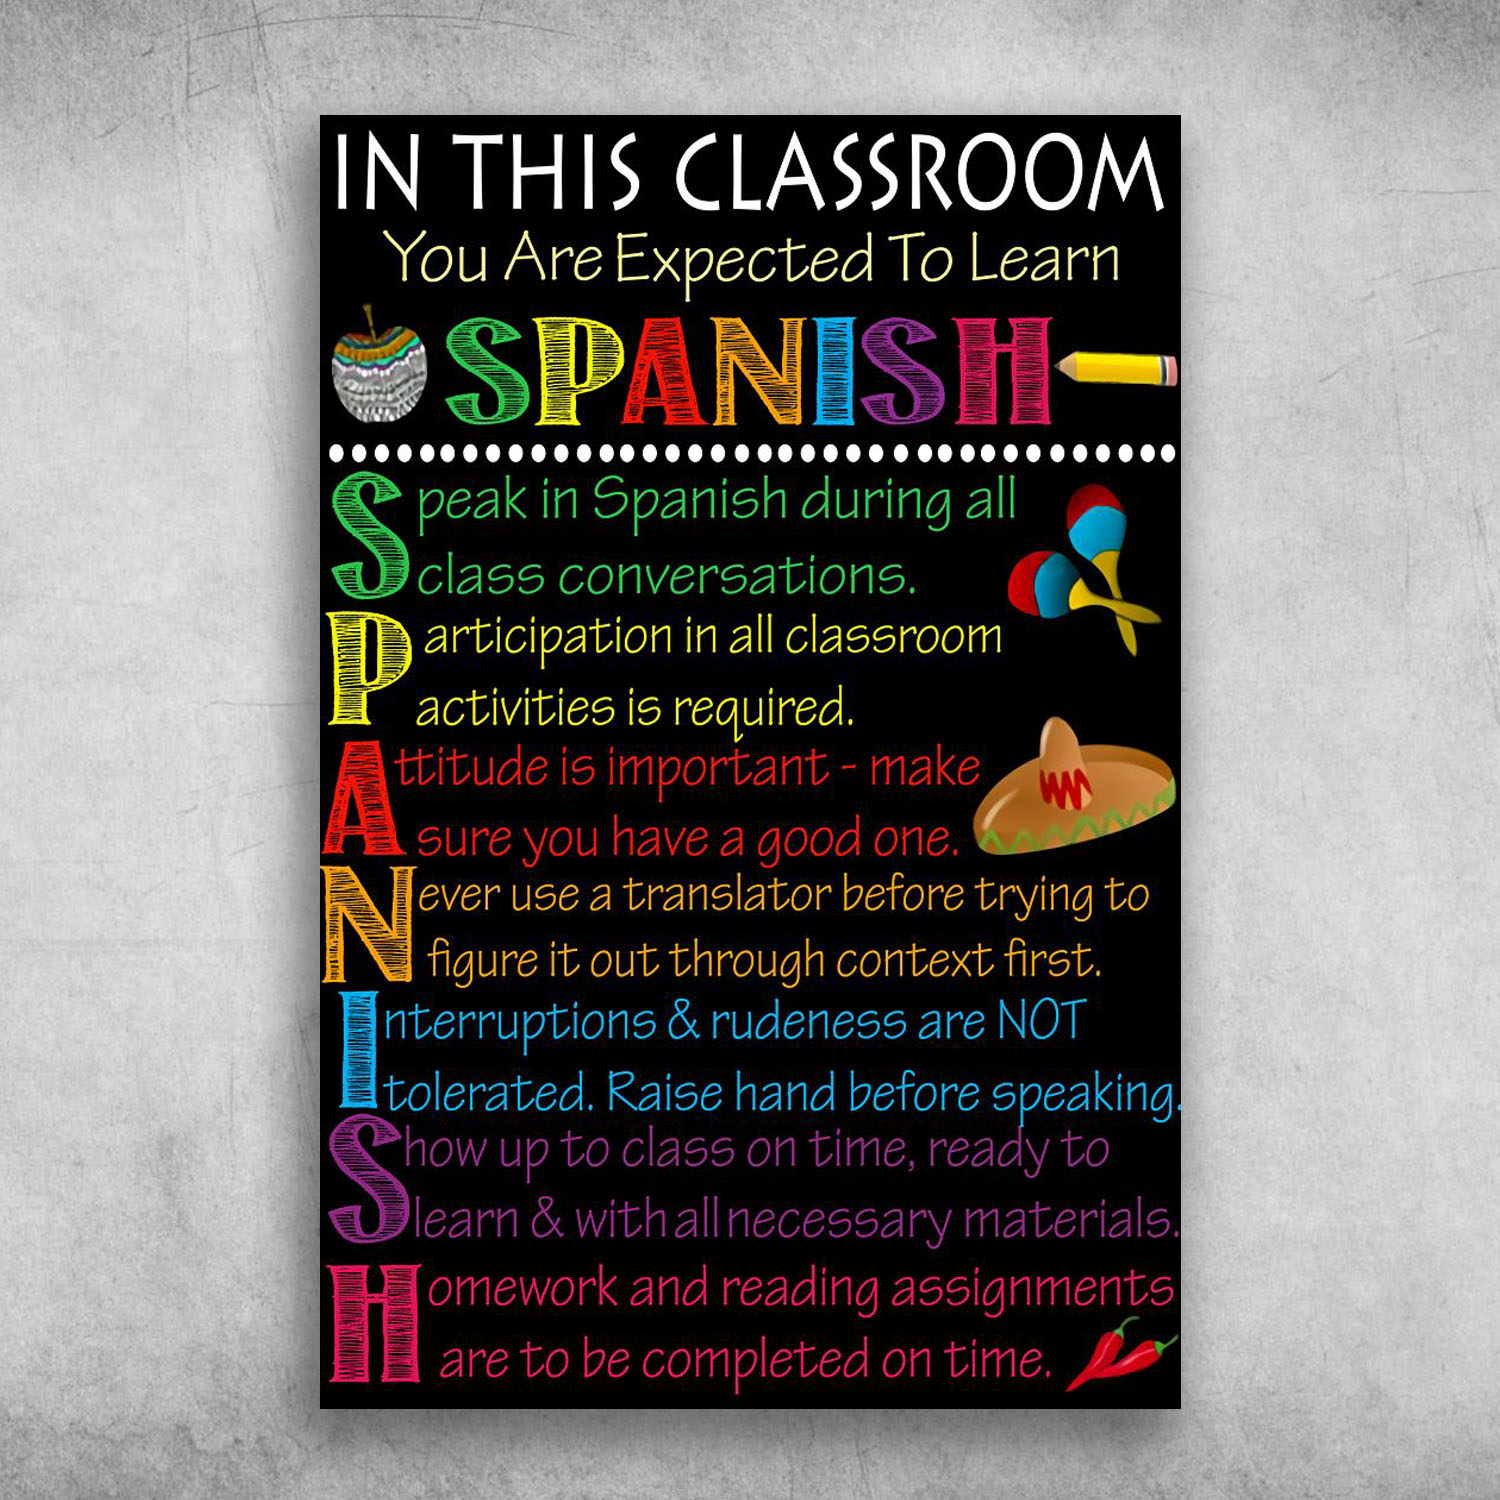 In This Classroom, You Are Expected To Learn Spanish